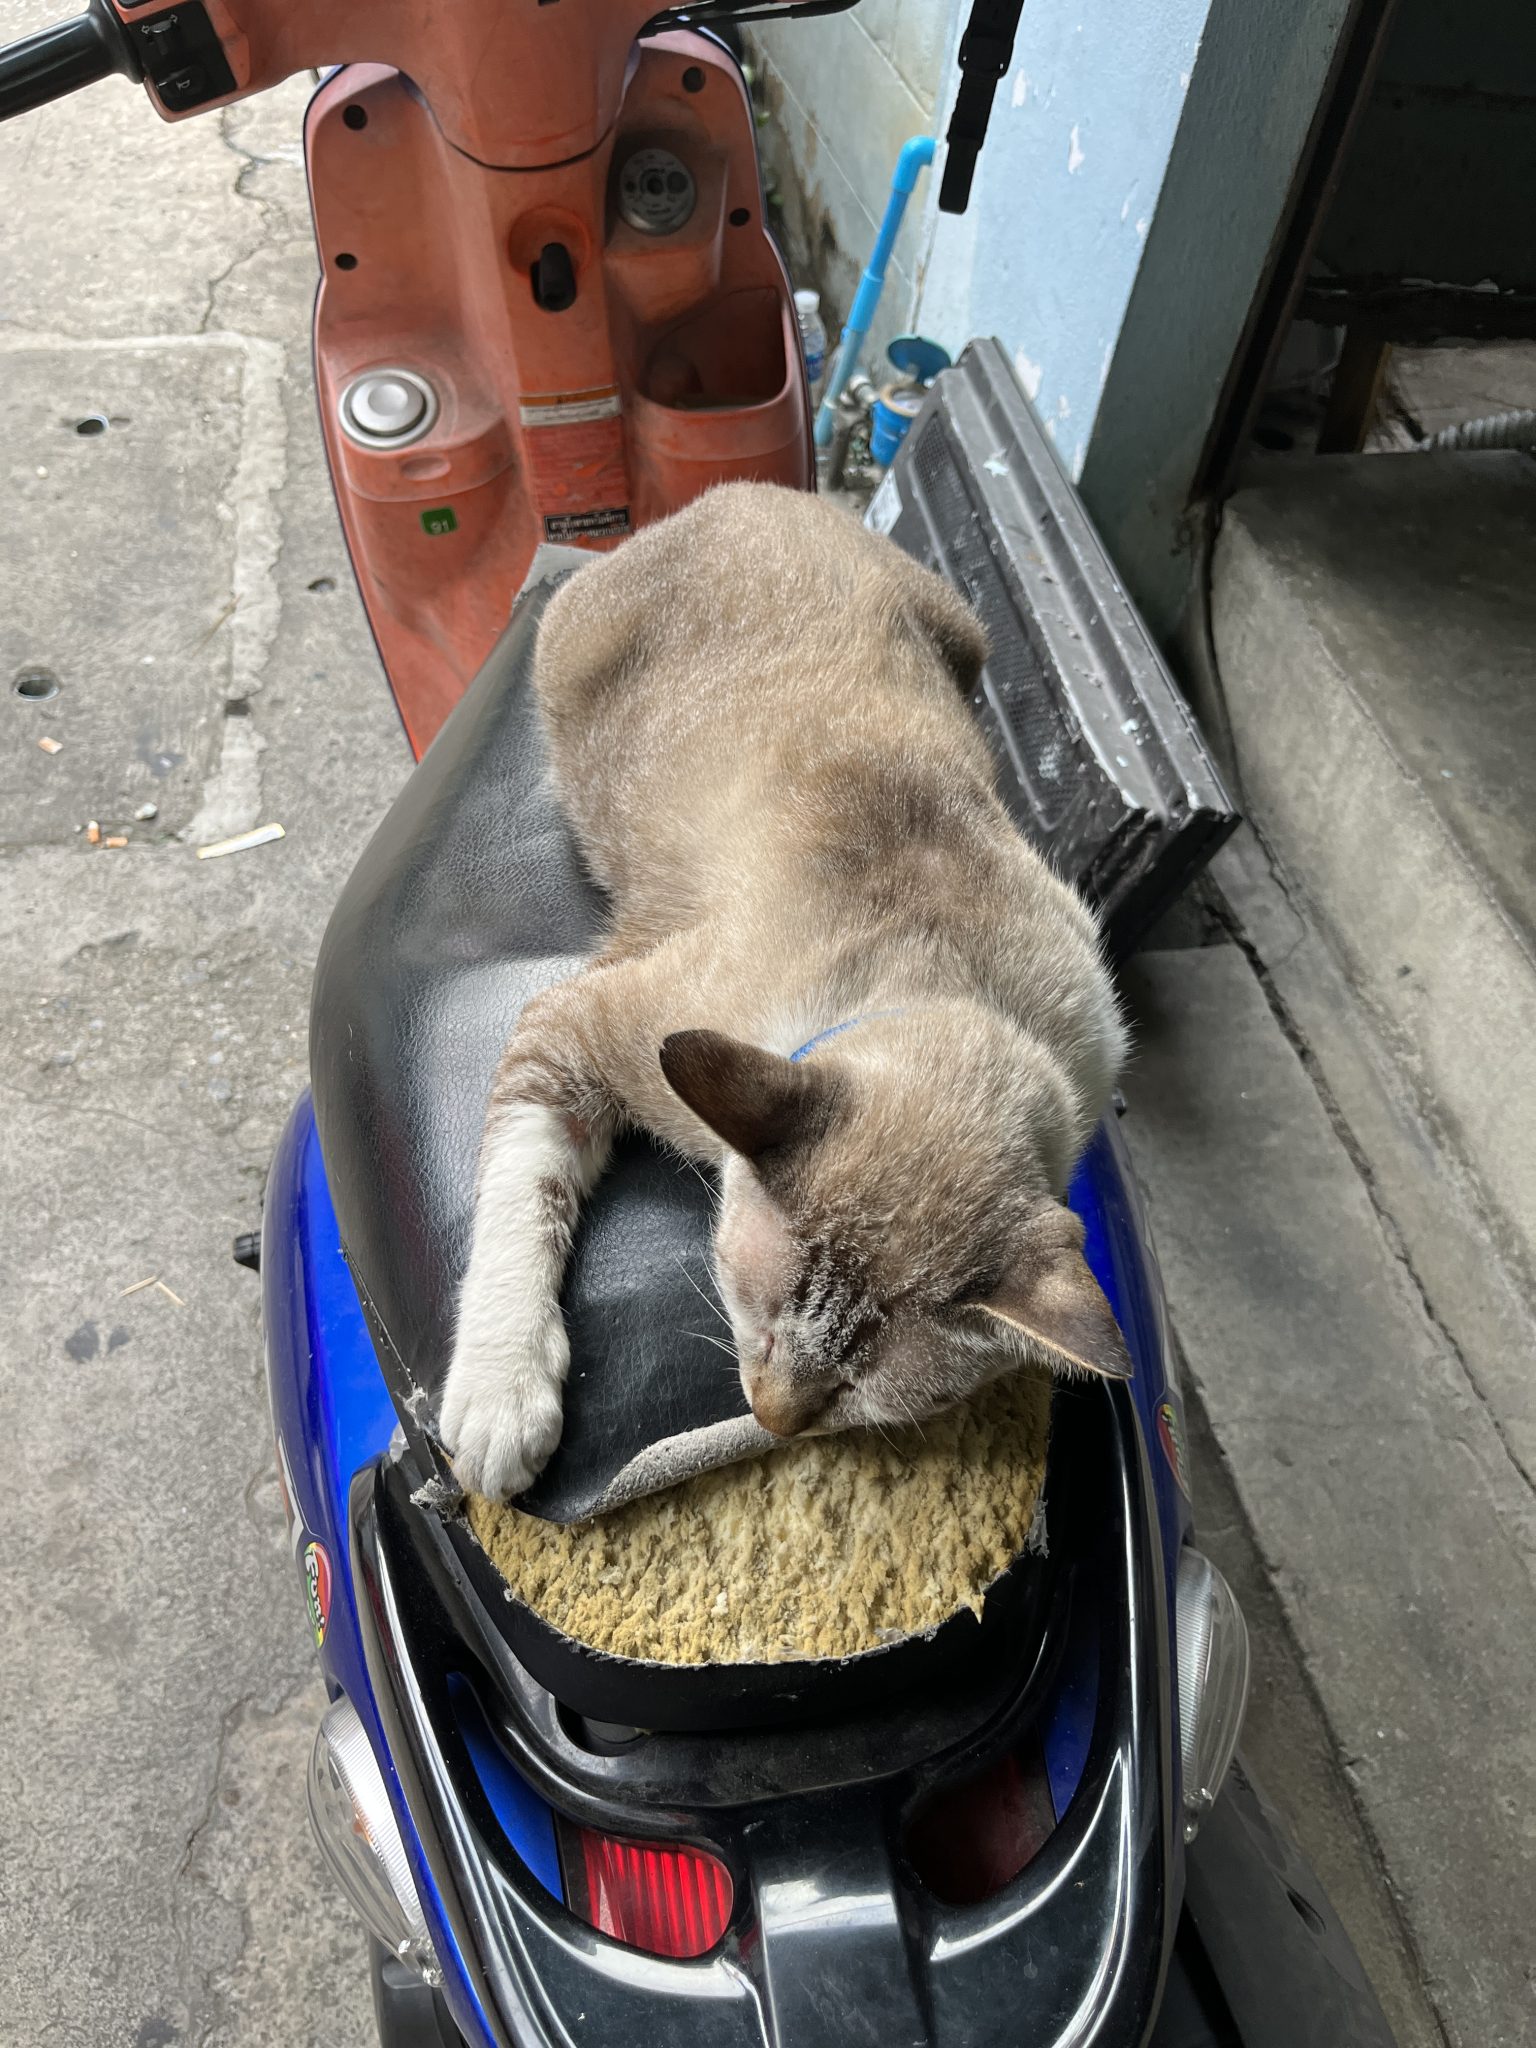 Cat napping on a scooter seat, Bangkok, Thailand